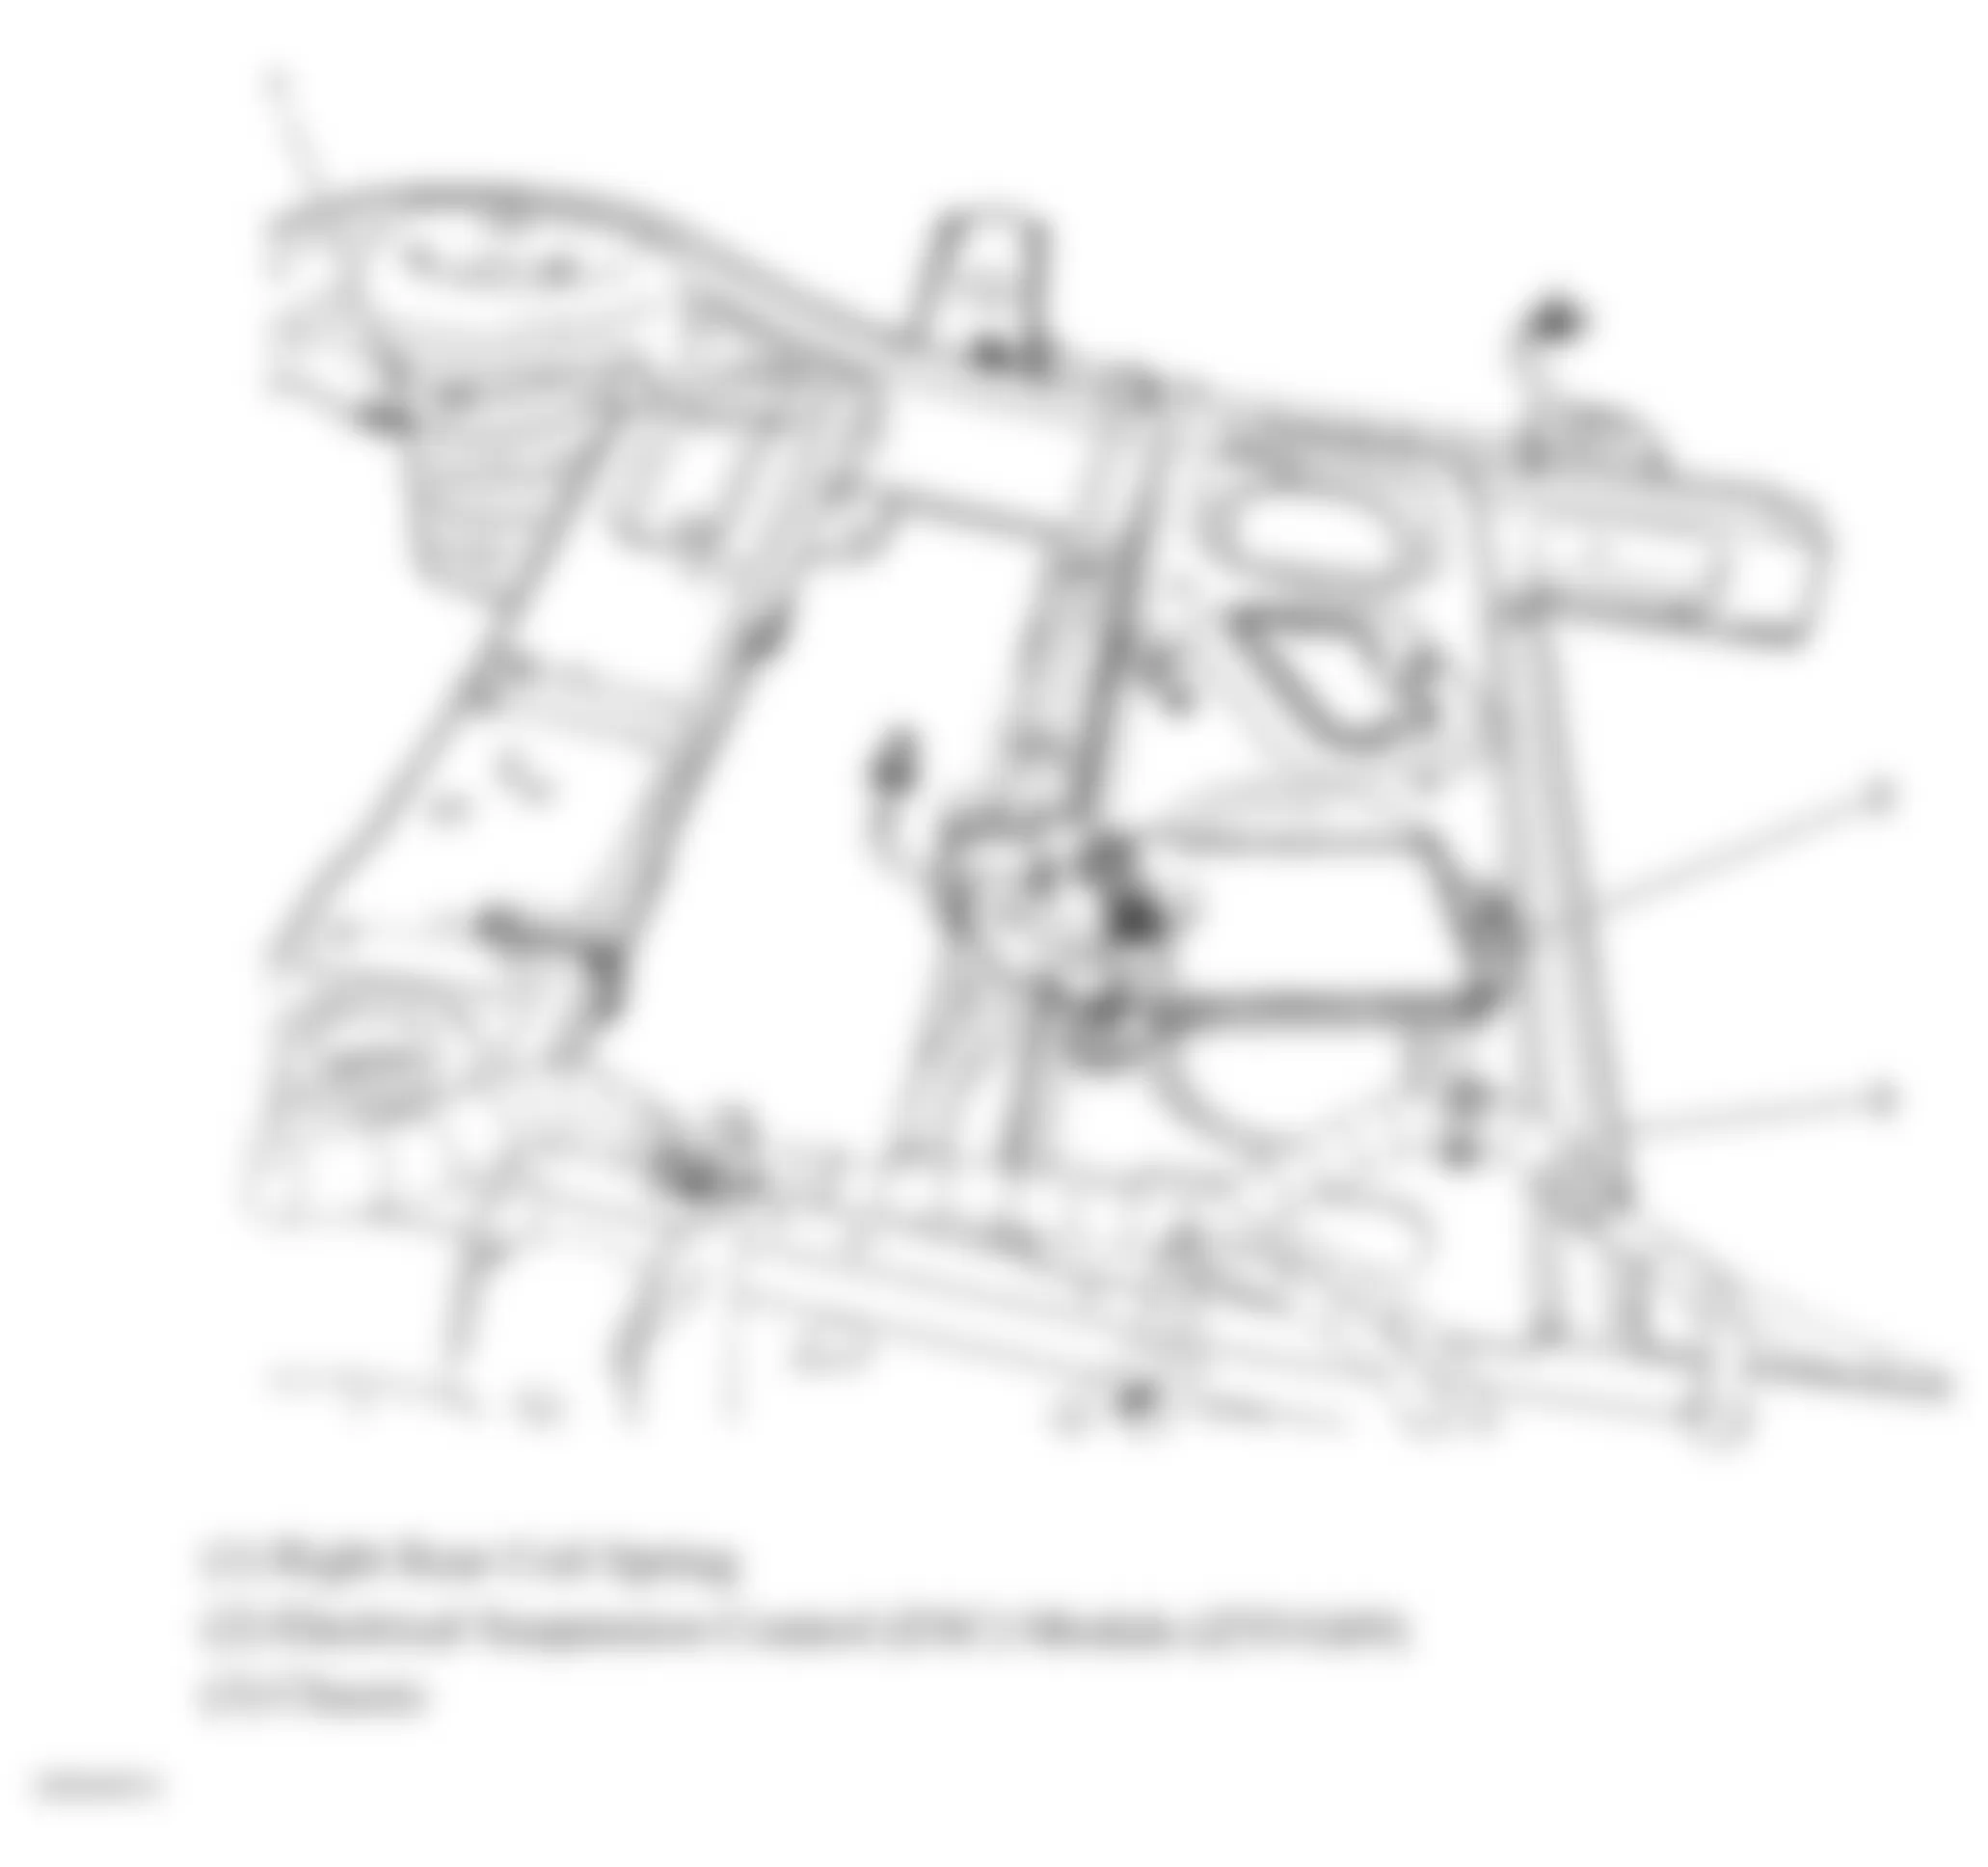 Chevrolet Avalanche 2008 - Component Locations -  Rear Chassis